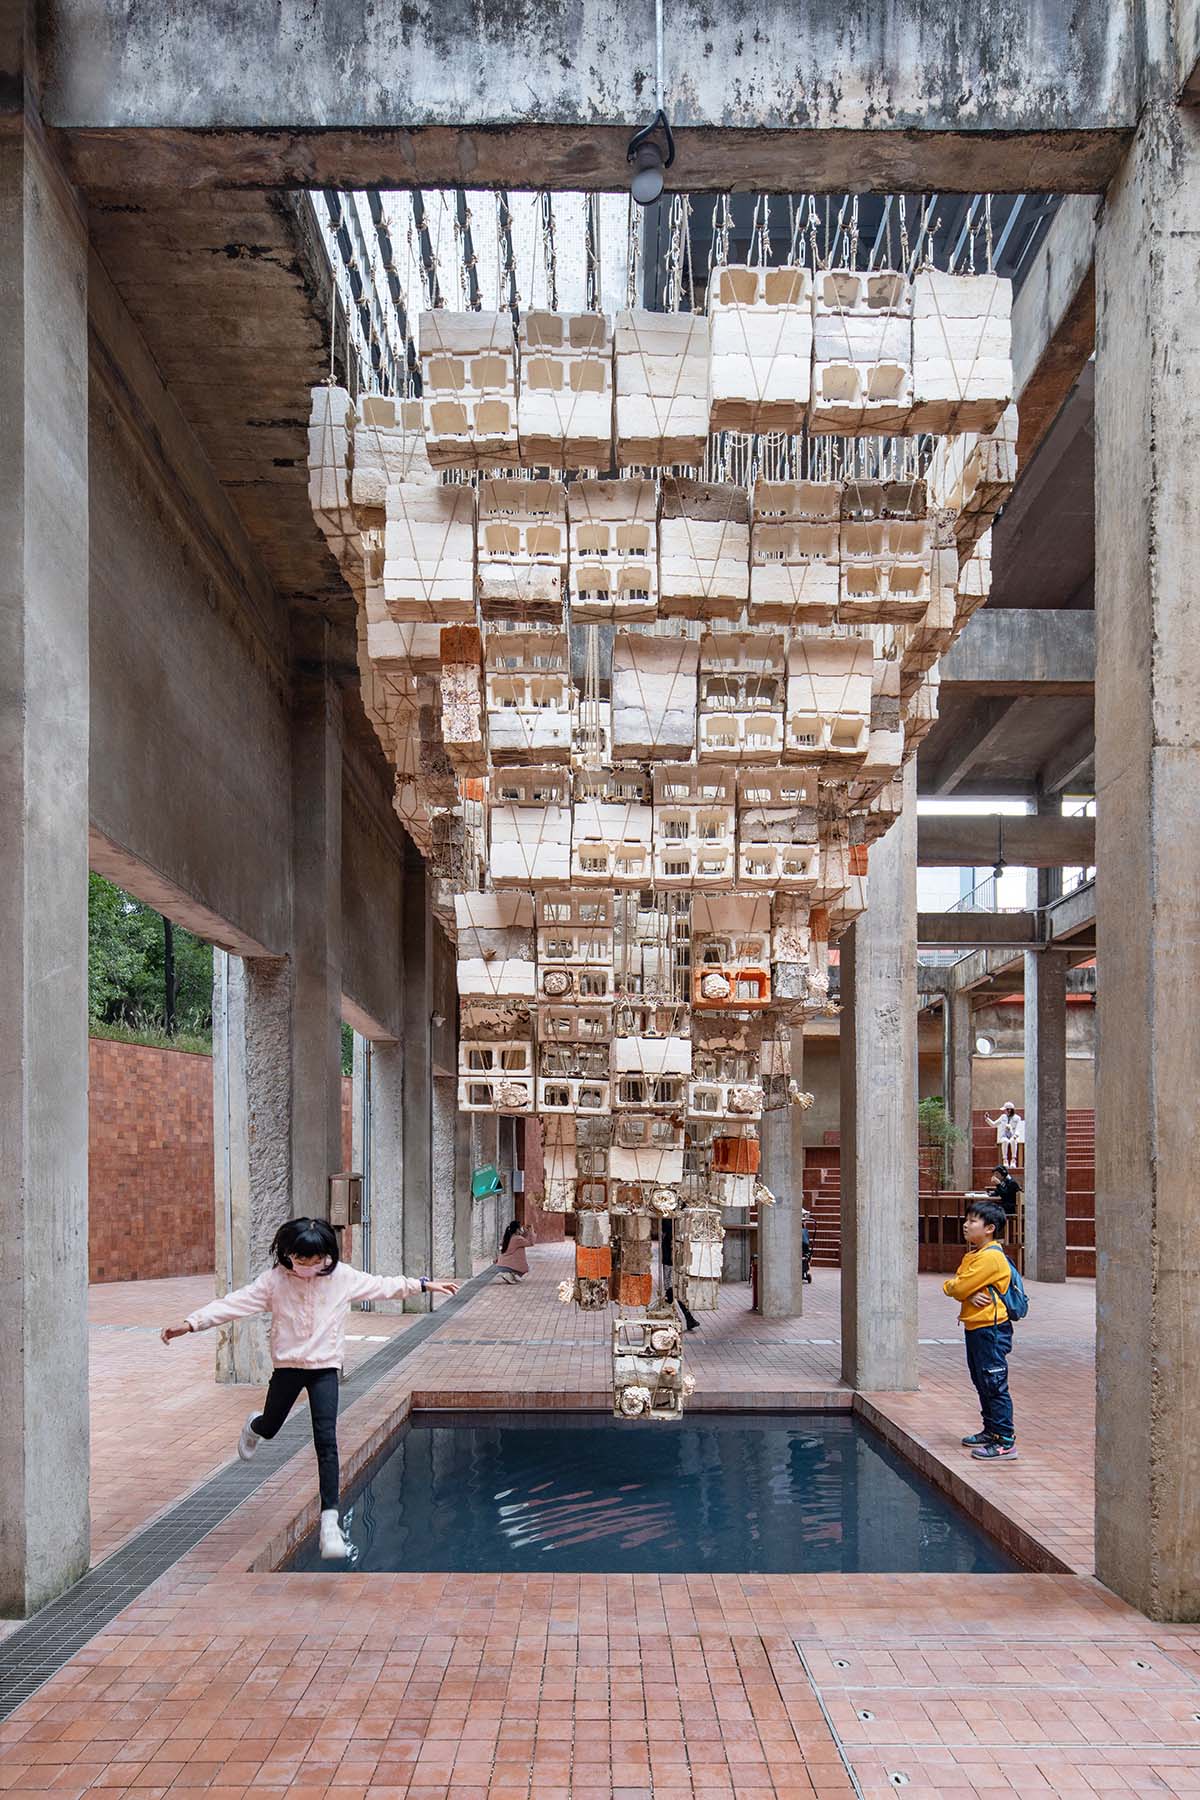 Mushroom brick pyramid in Shenzhen explores relationship between living organisms and architecture